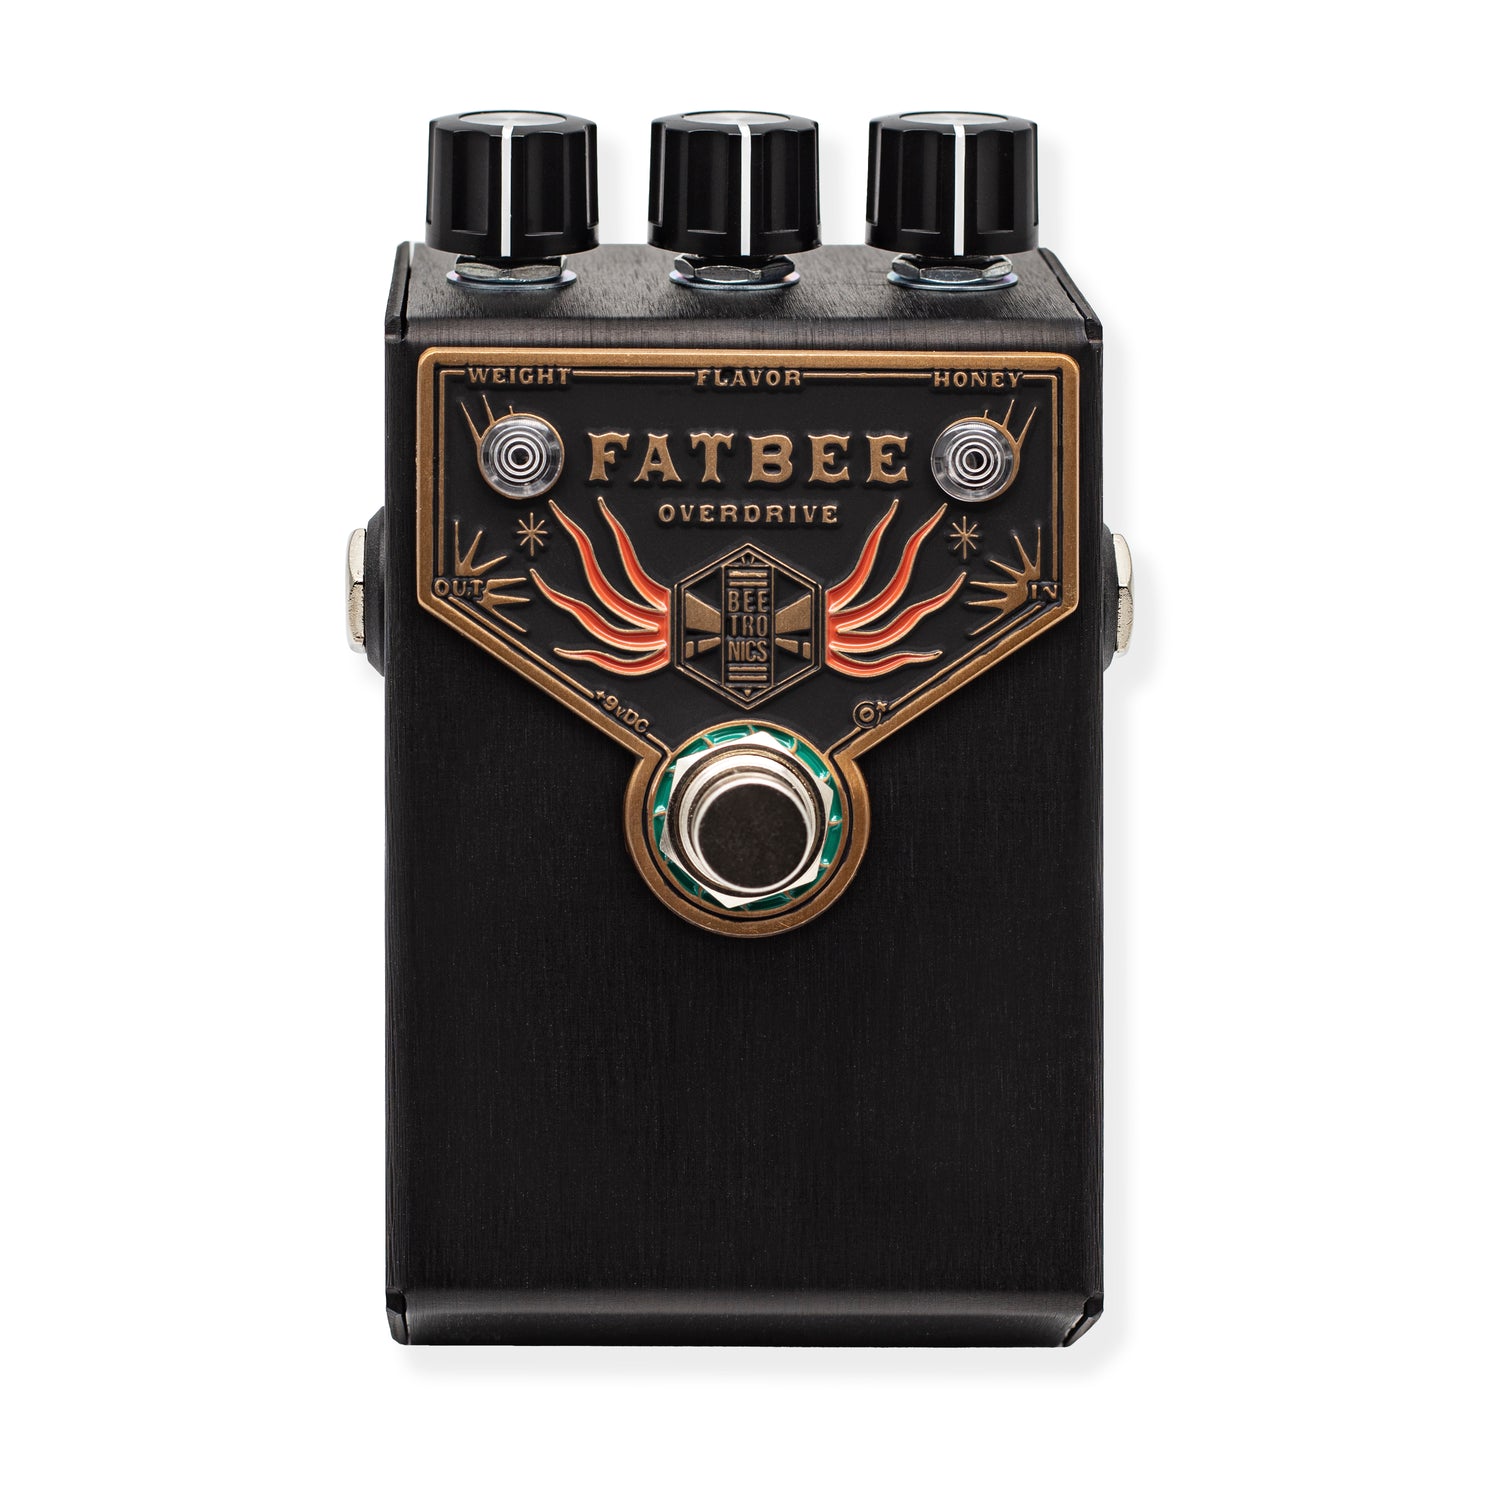 FATBEE Overdrive &lt;p&gt; BF20 Limited Edition